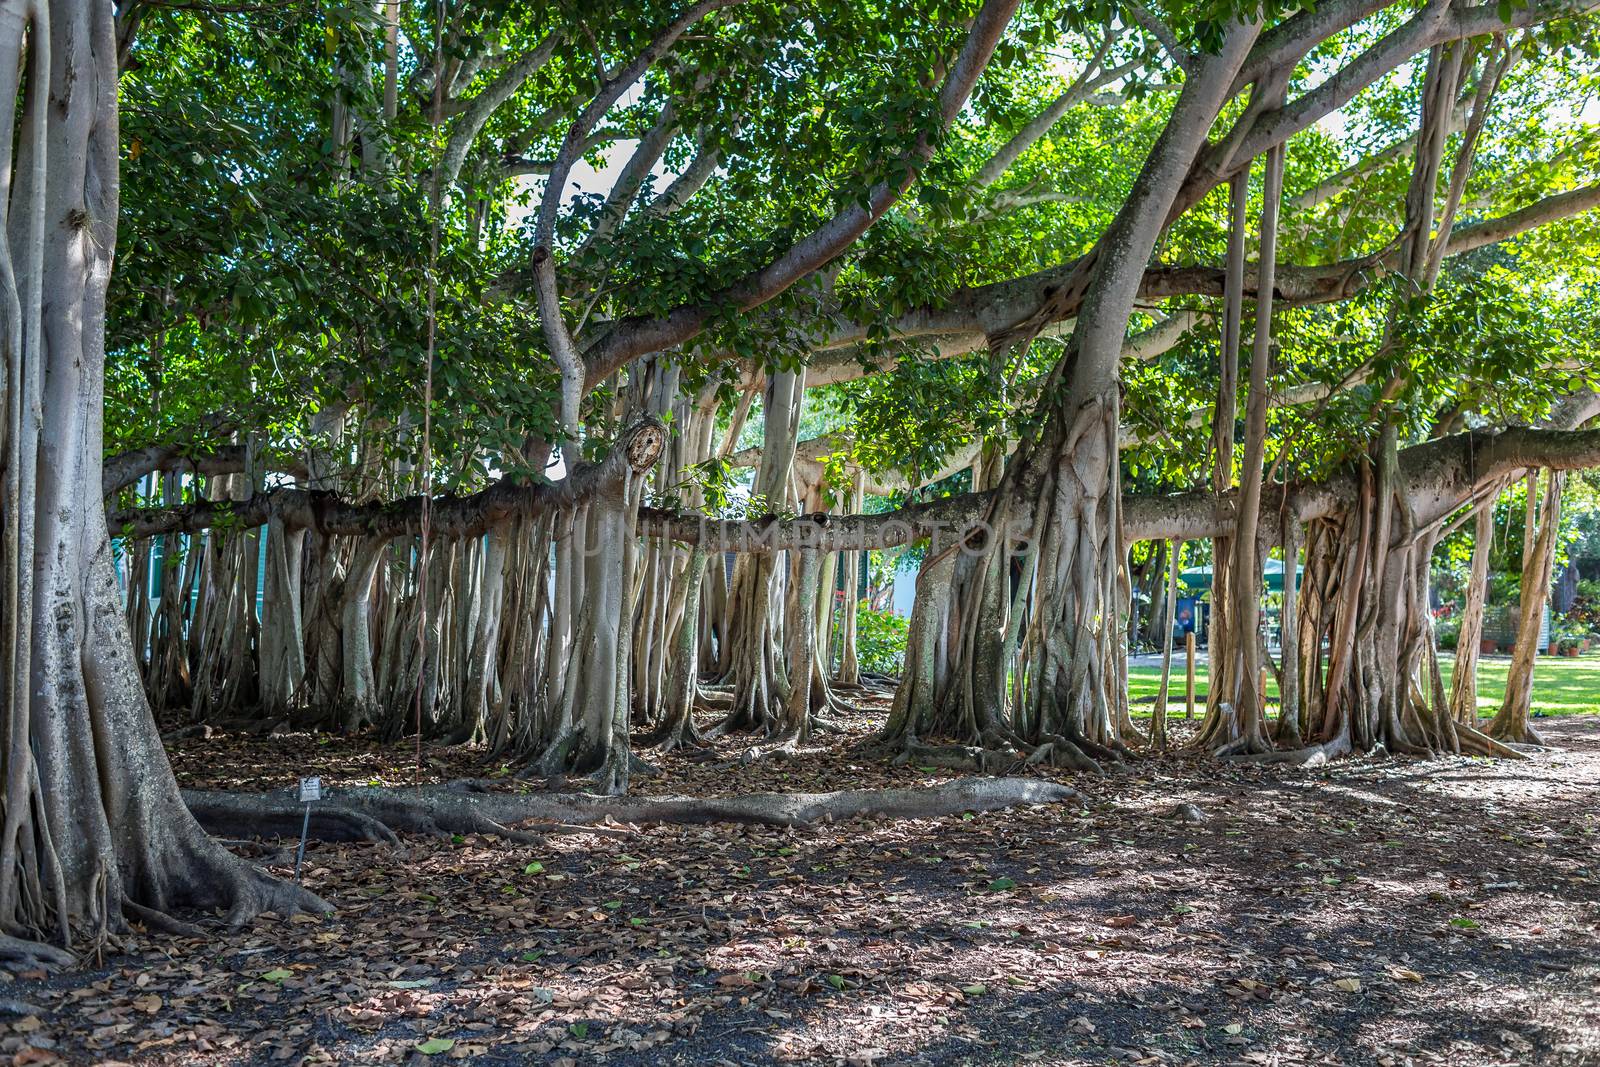 A banyan tree in south Florida that was planted in the 1920s.